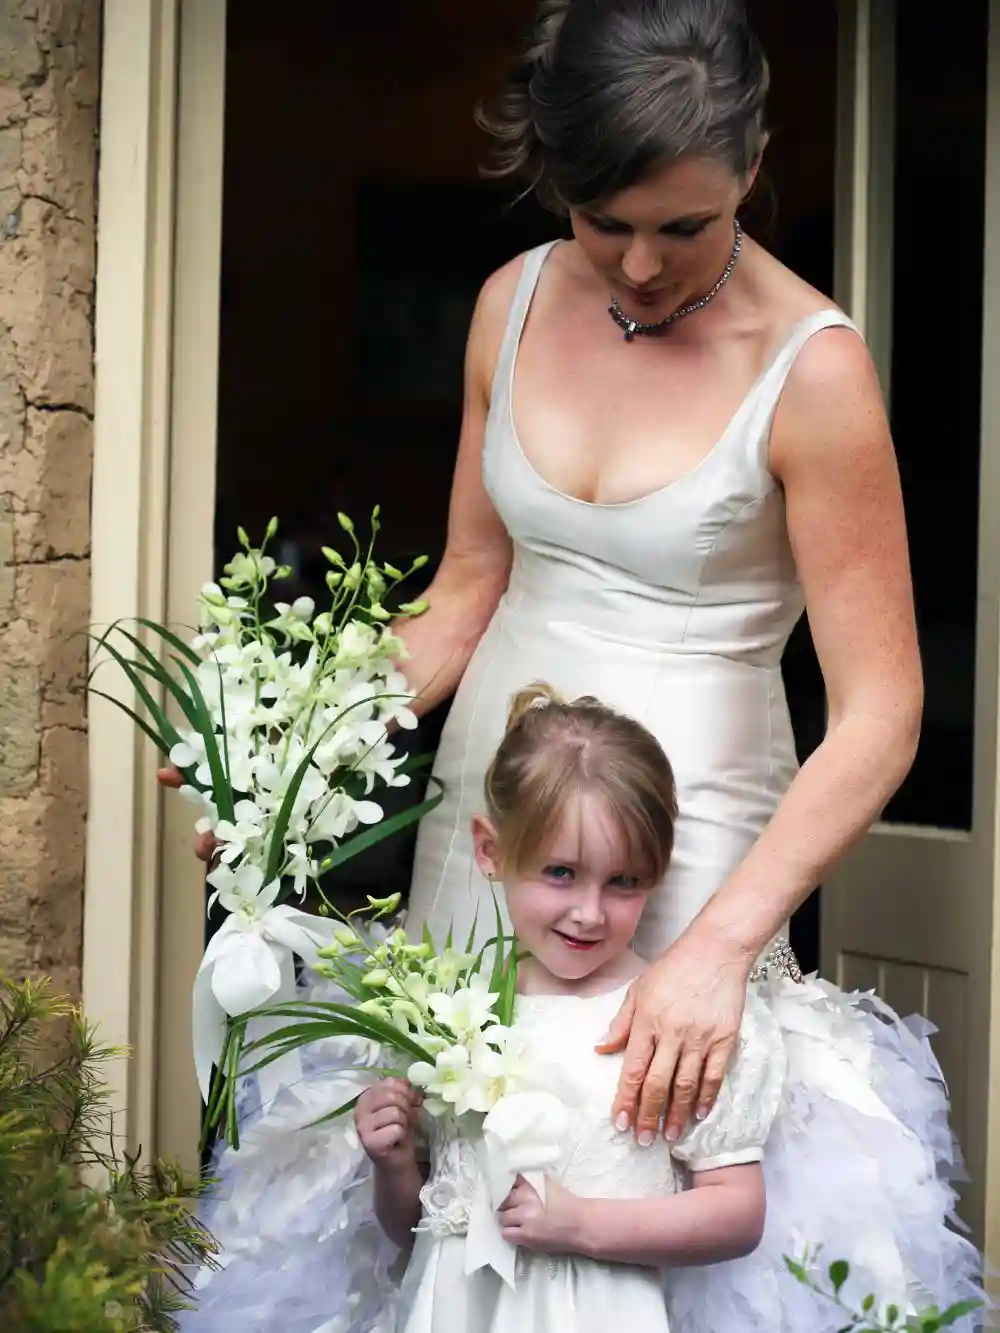 The bride and flower girl wear white dresses